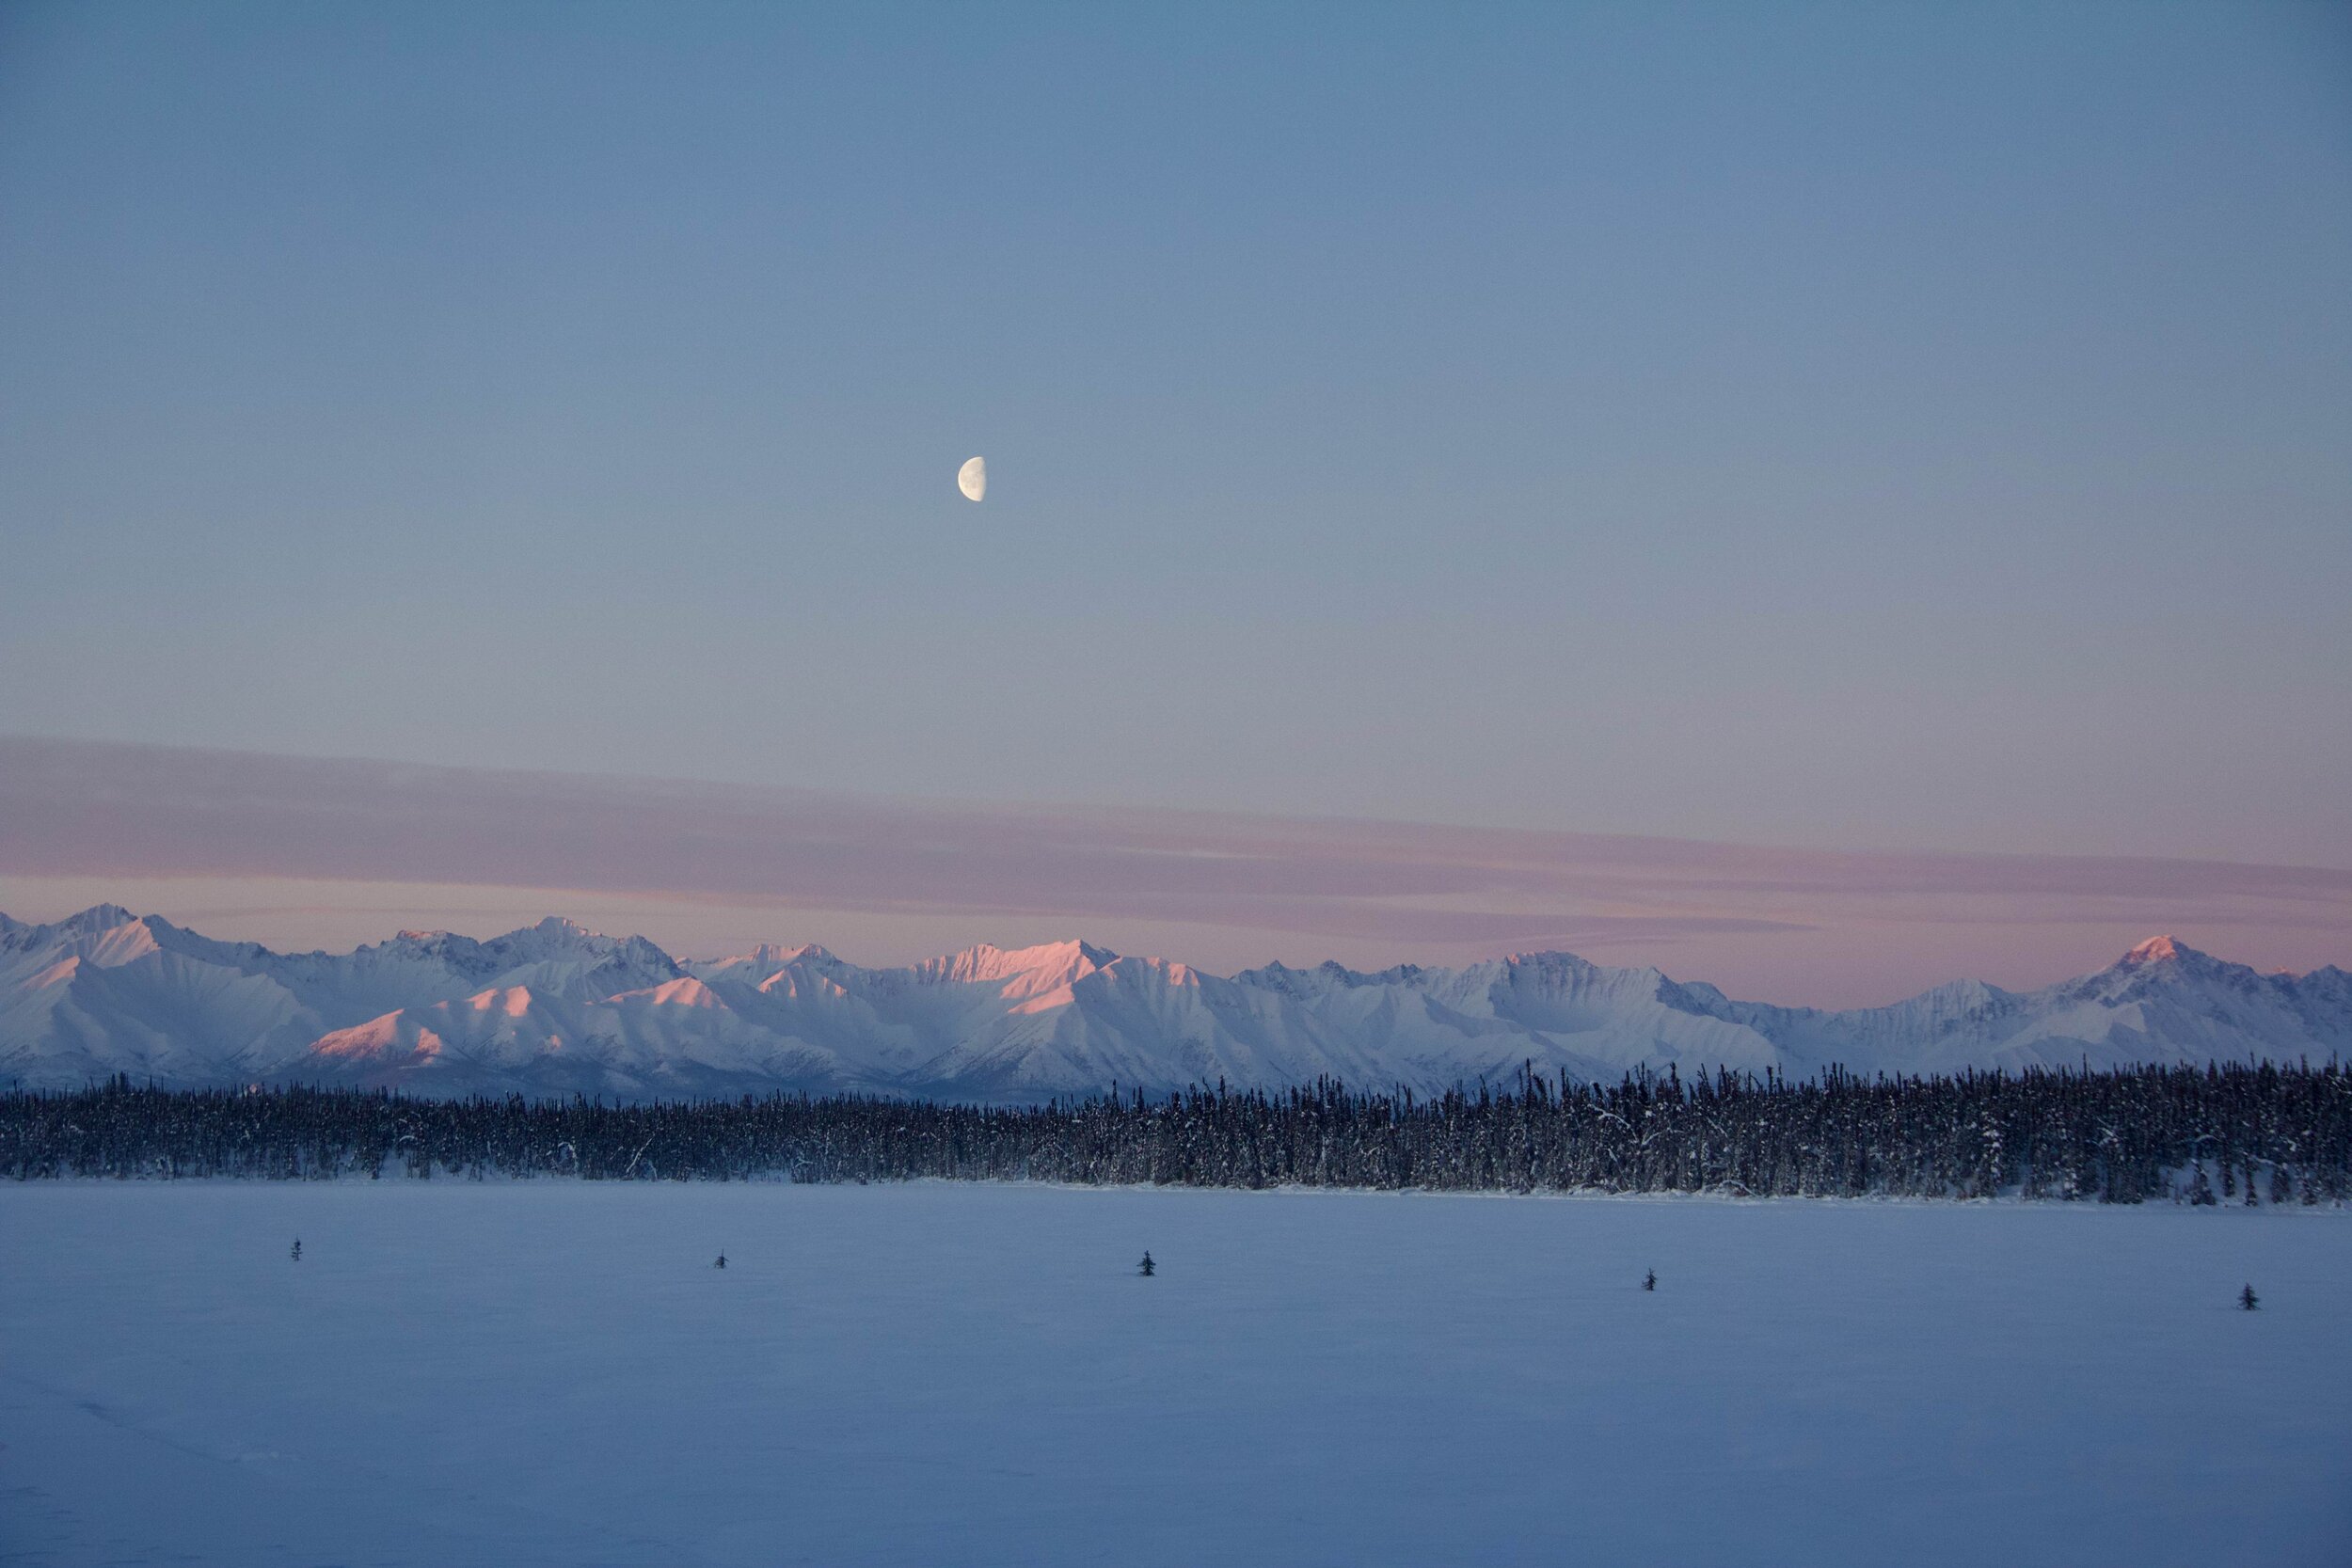  A snowy landscape of mountains in Tetlin National Wildlife Refuge. Trees line the mountains below as a waning moon hangs above.  